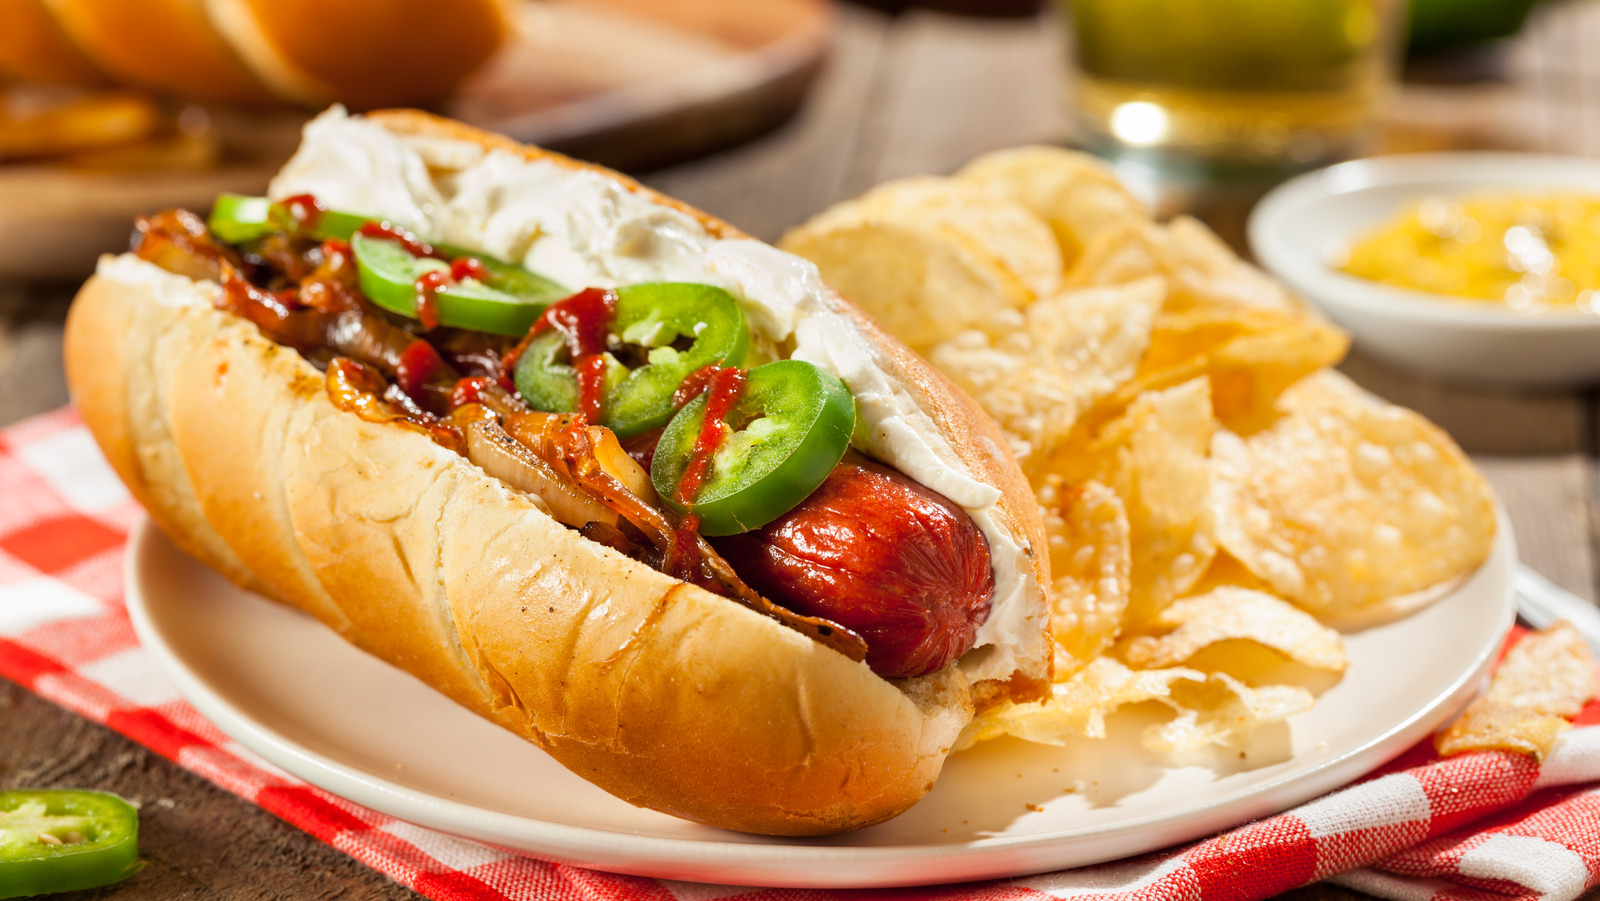 Here's What Makes Seattle-Style Hot Dogs A Regional Specialty